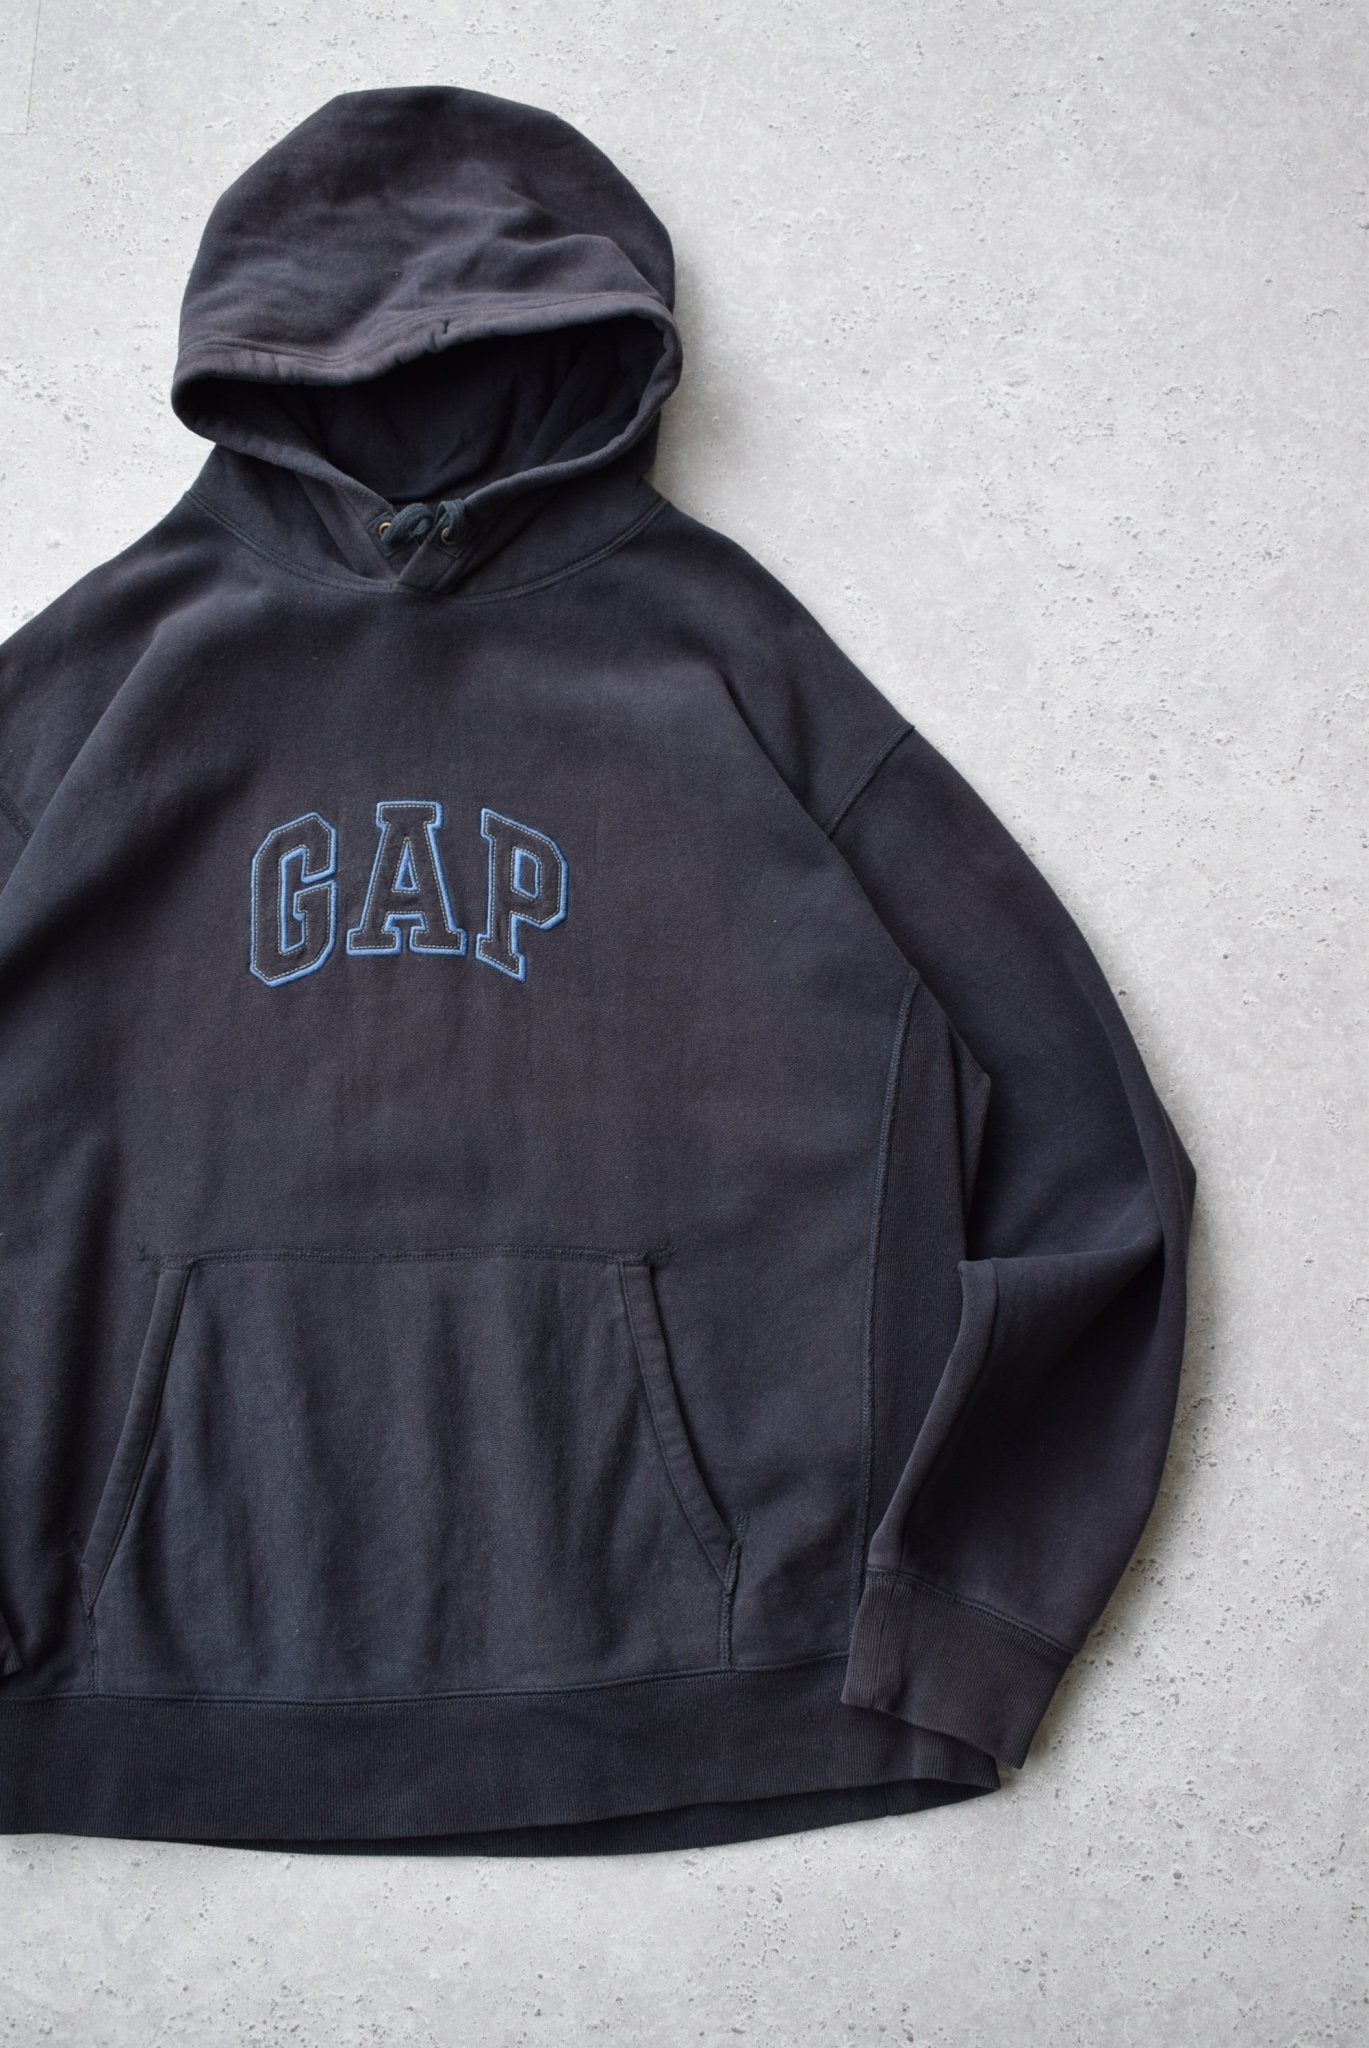 Vintage Gap Embroidered Spellout Hoodie (XL/XXL) - Retrospective Store